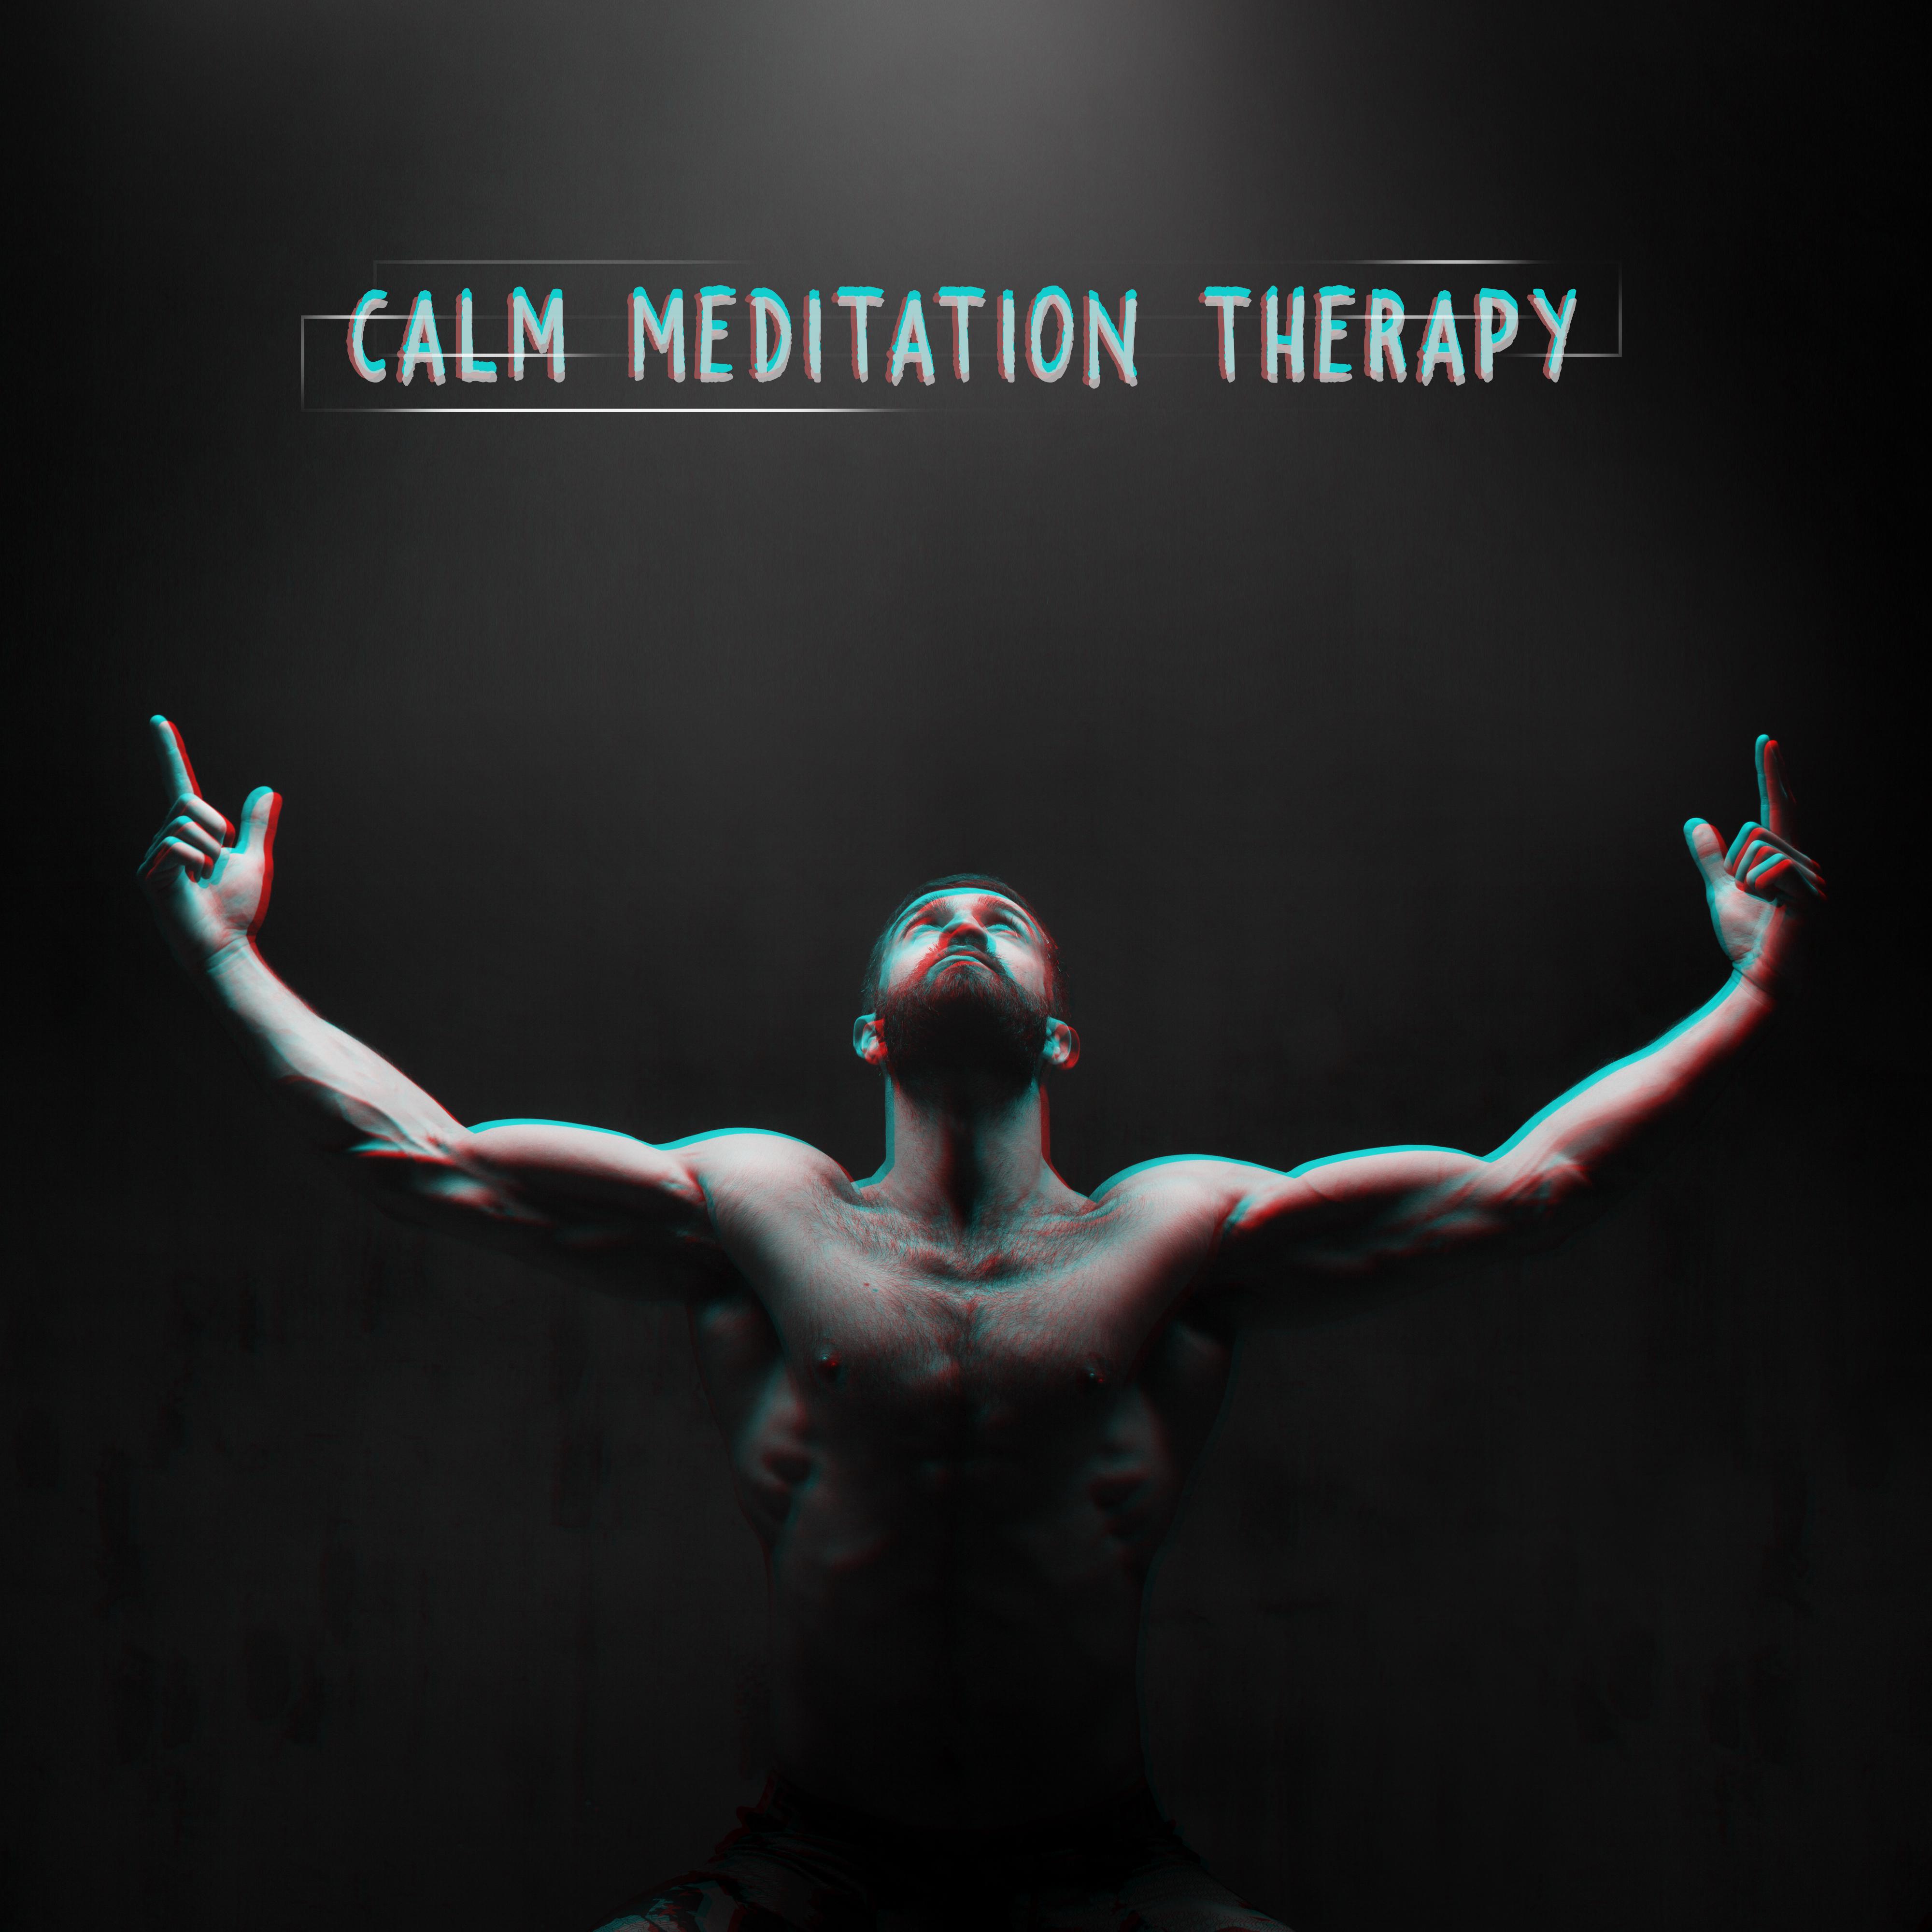 Calm Meditation Therapy – Yoga Music 2019, Zen Lounge, Meditation Music Zone, Stress Relief, Calming Songs for Relaxation, Calm Mind, Yoga Meditation